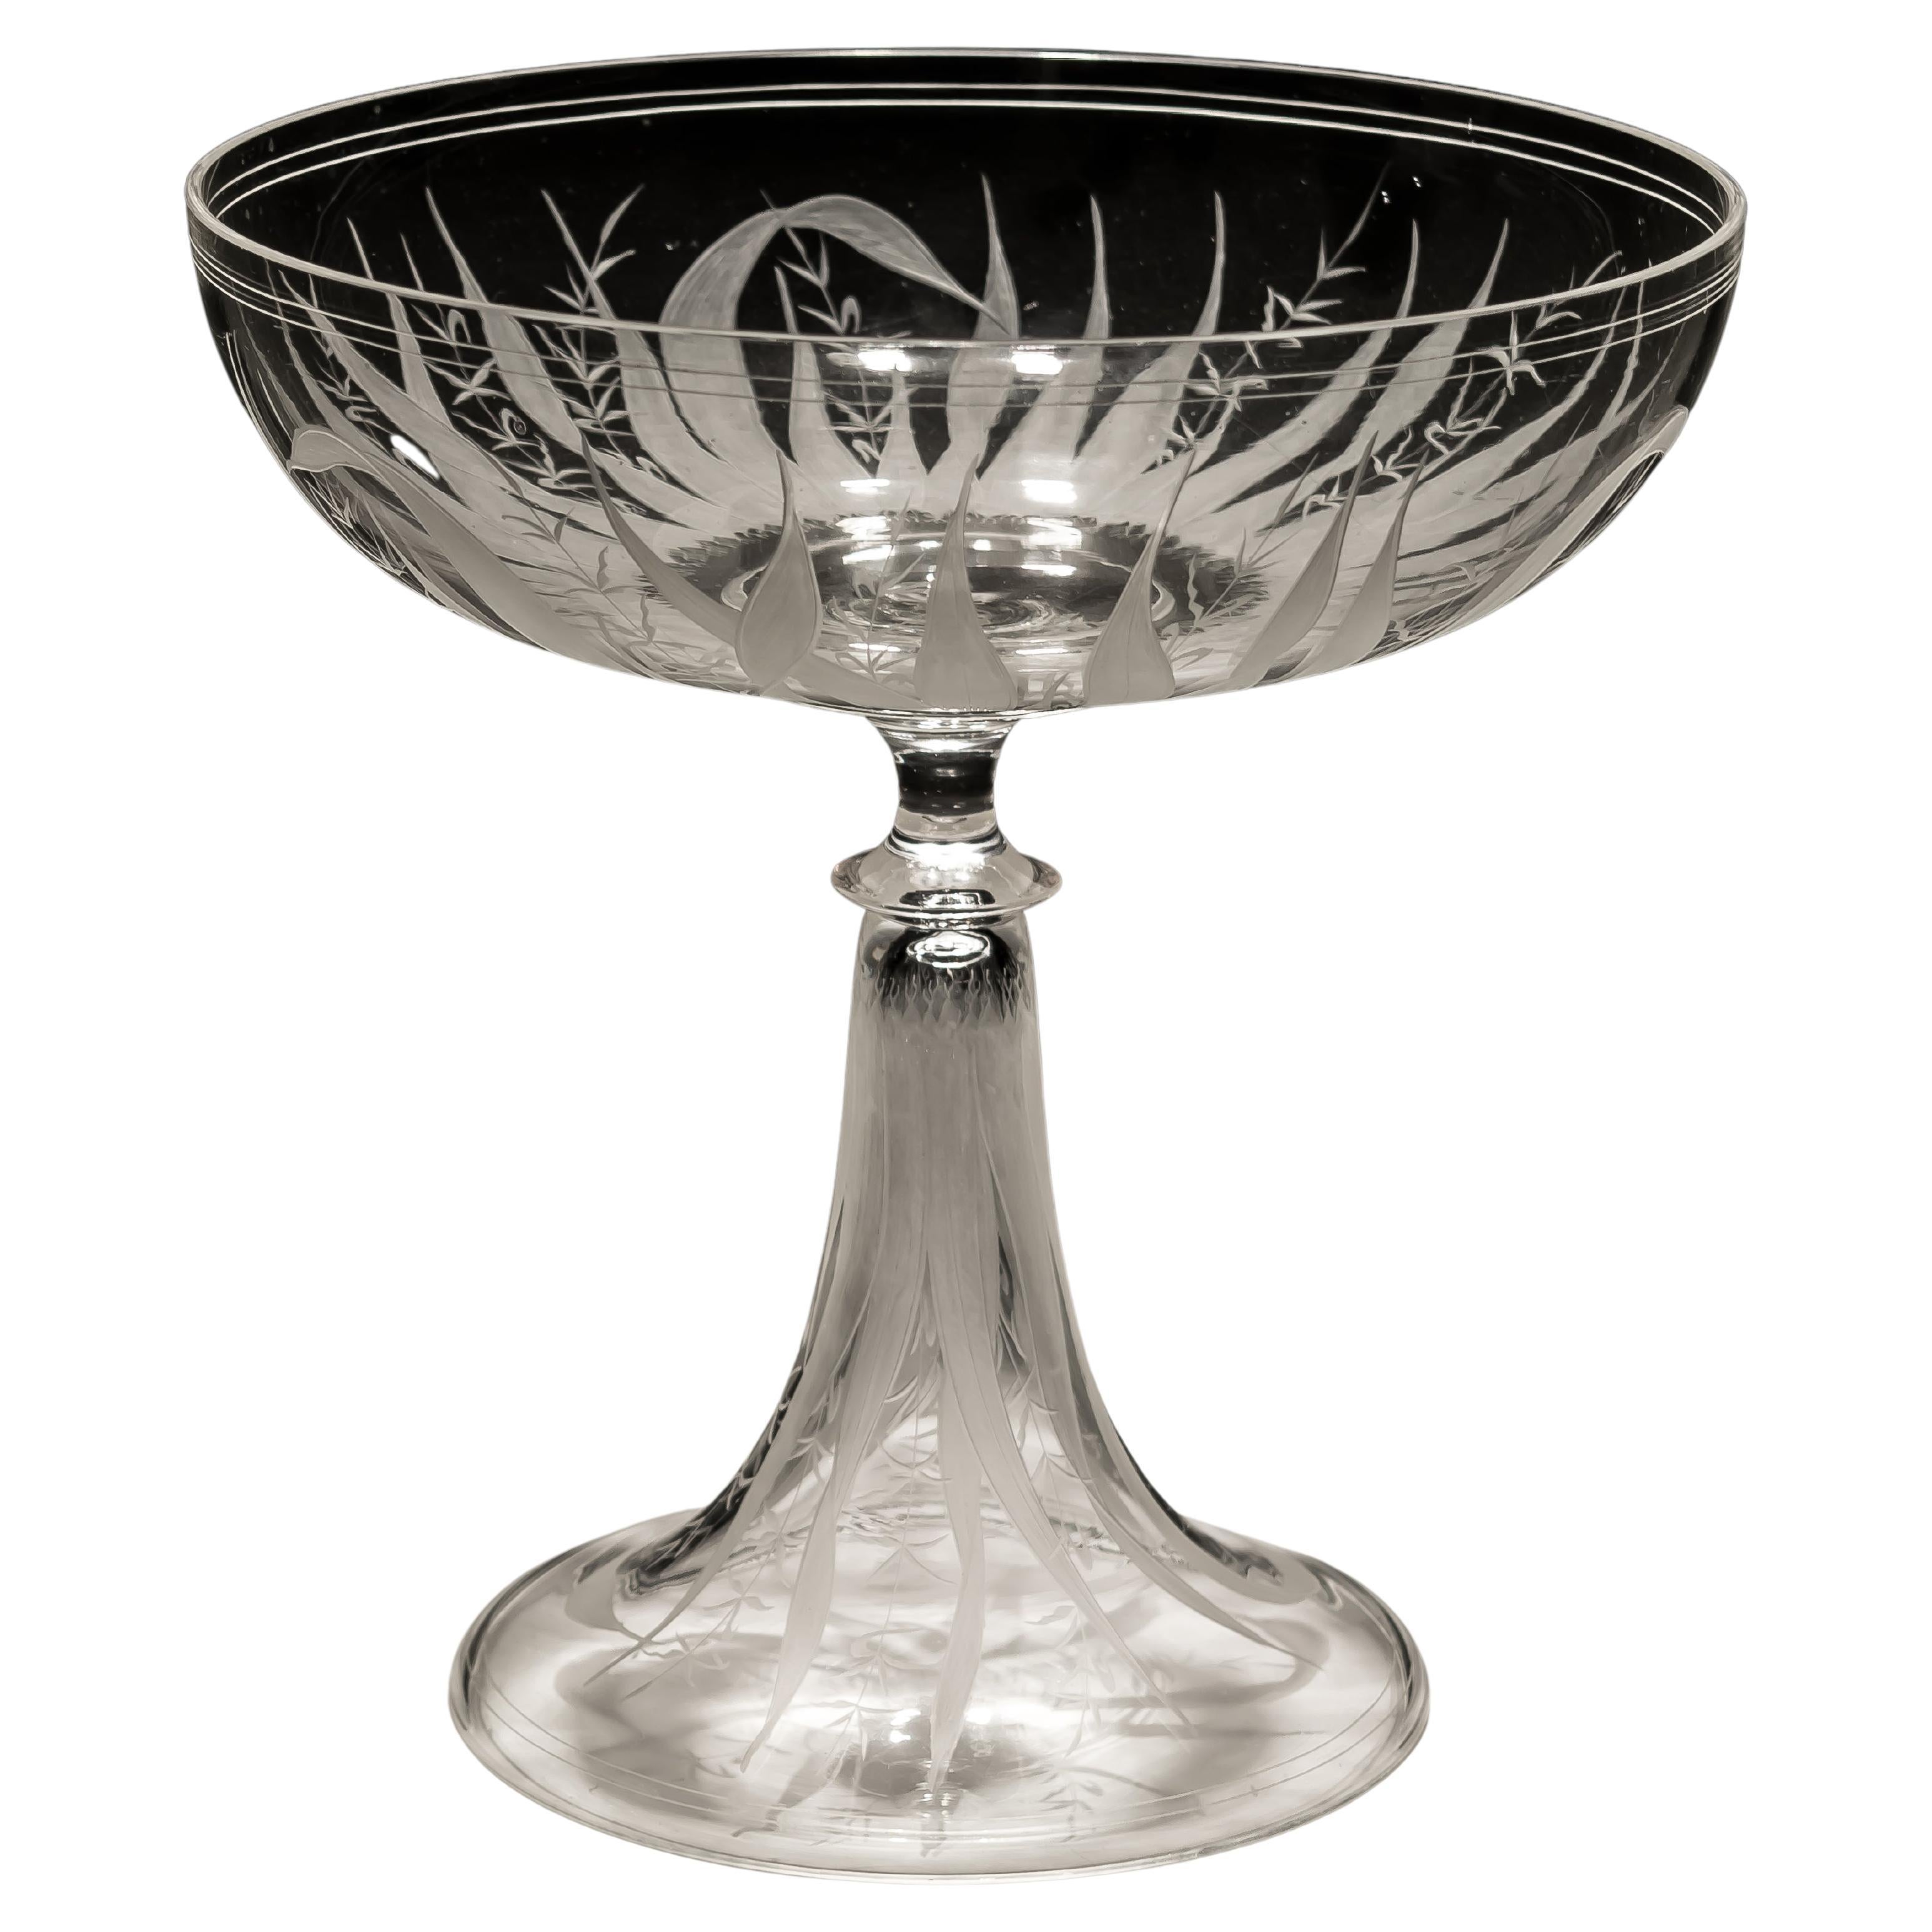 Fineley Engraved Victorian Tazza